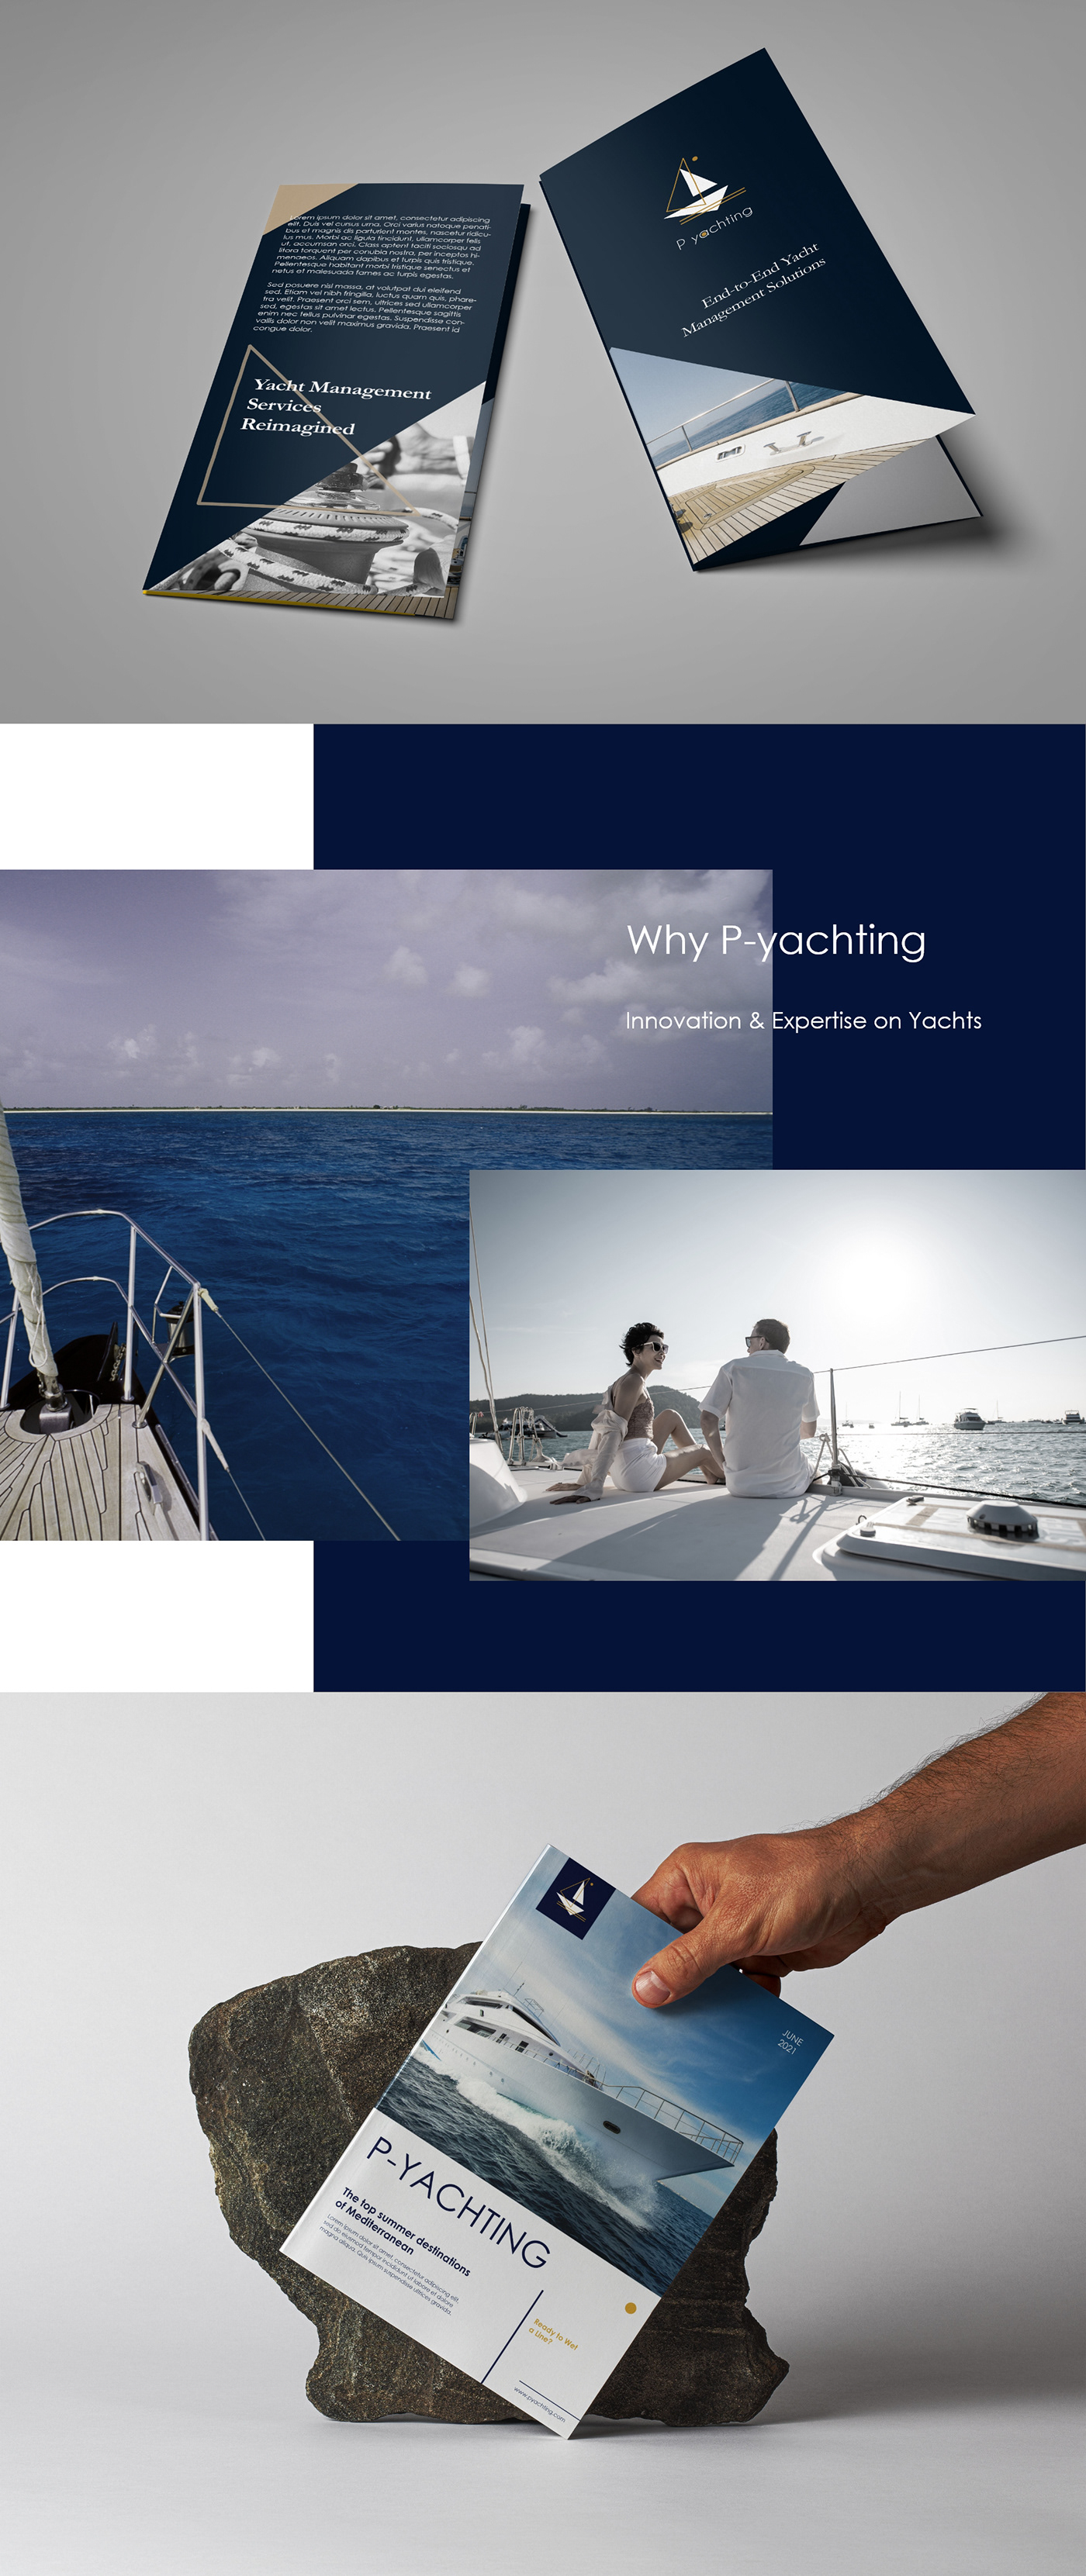 Brochure and magazine design for yachting company.